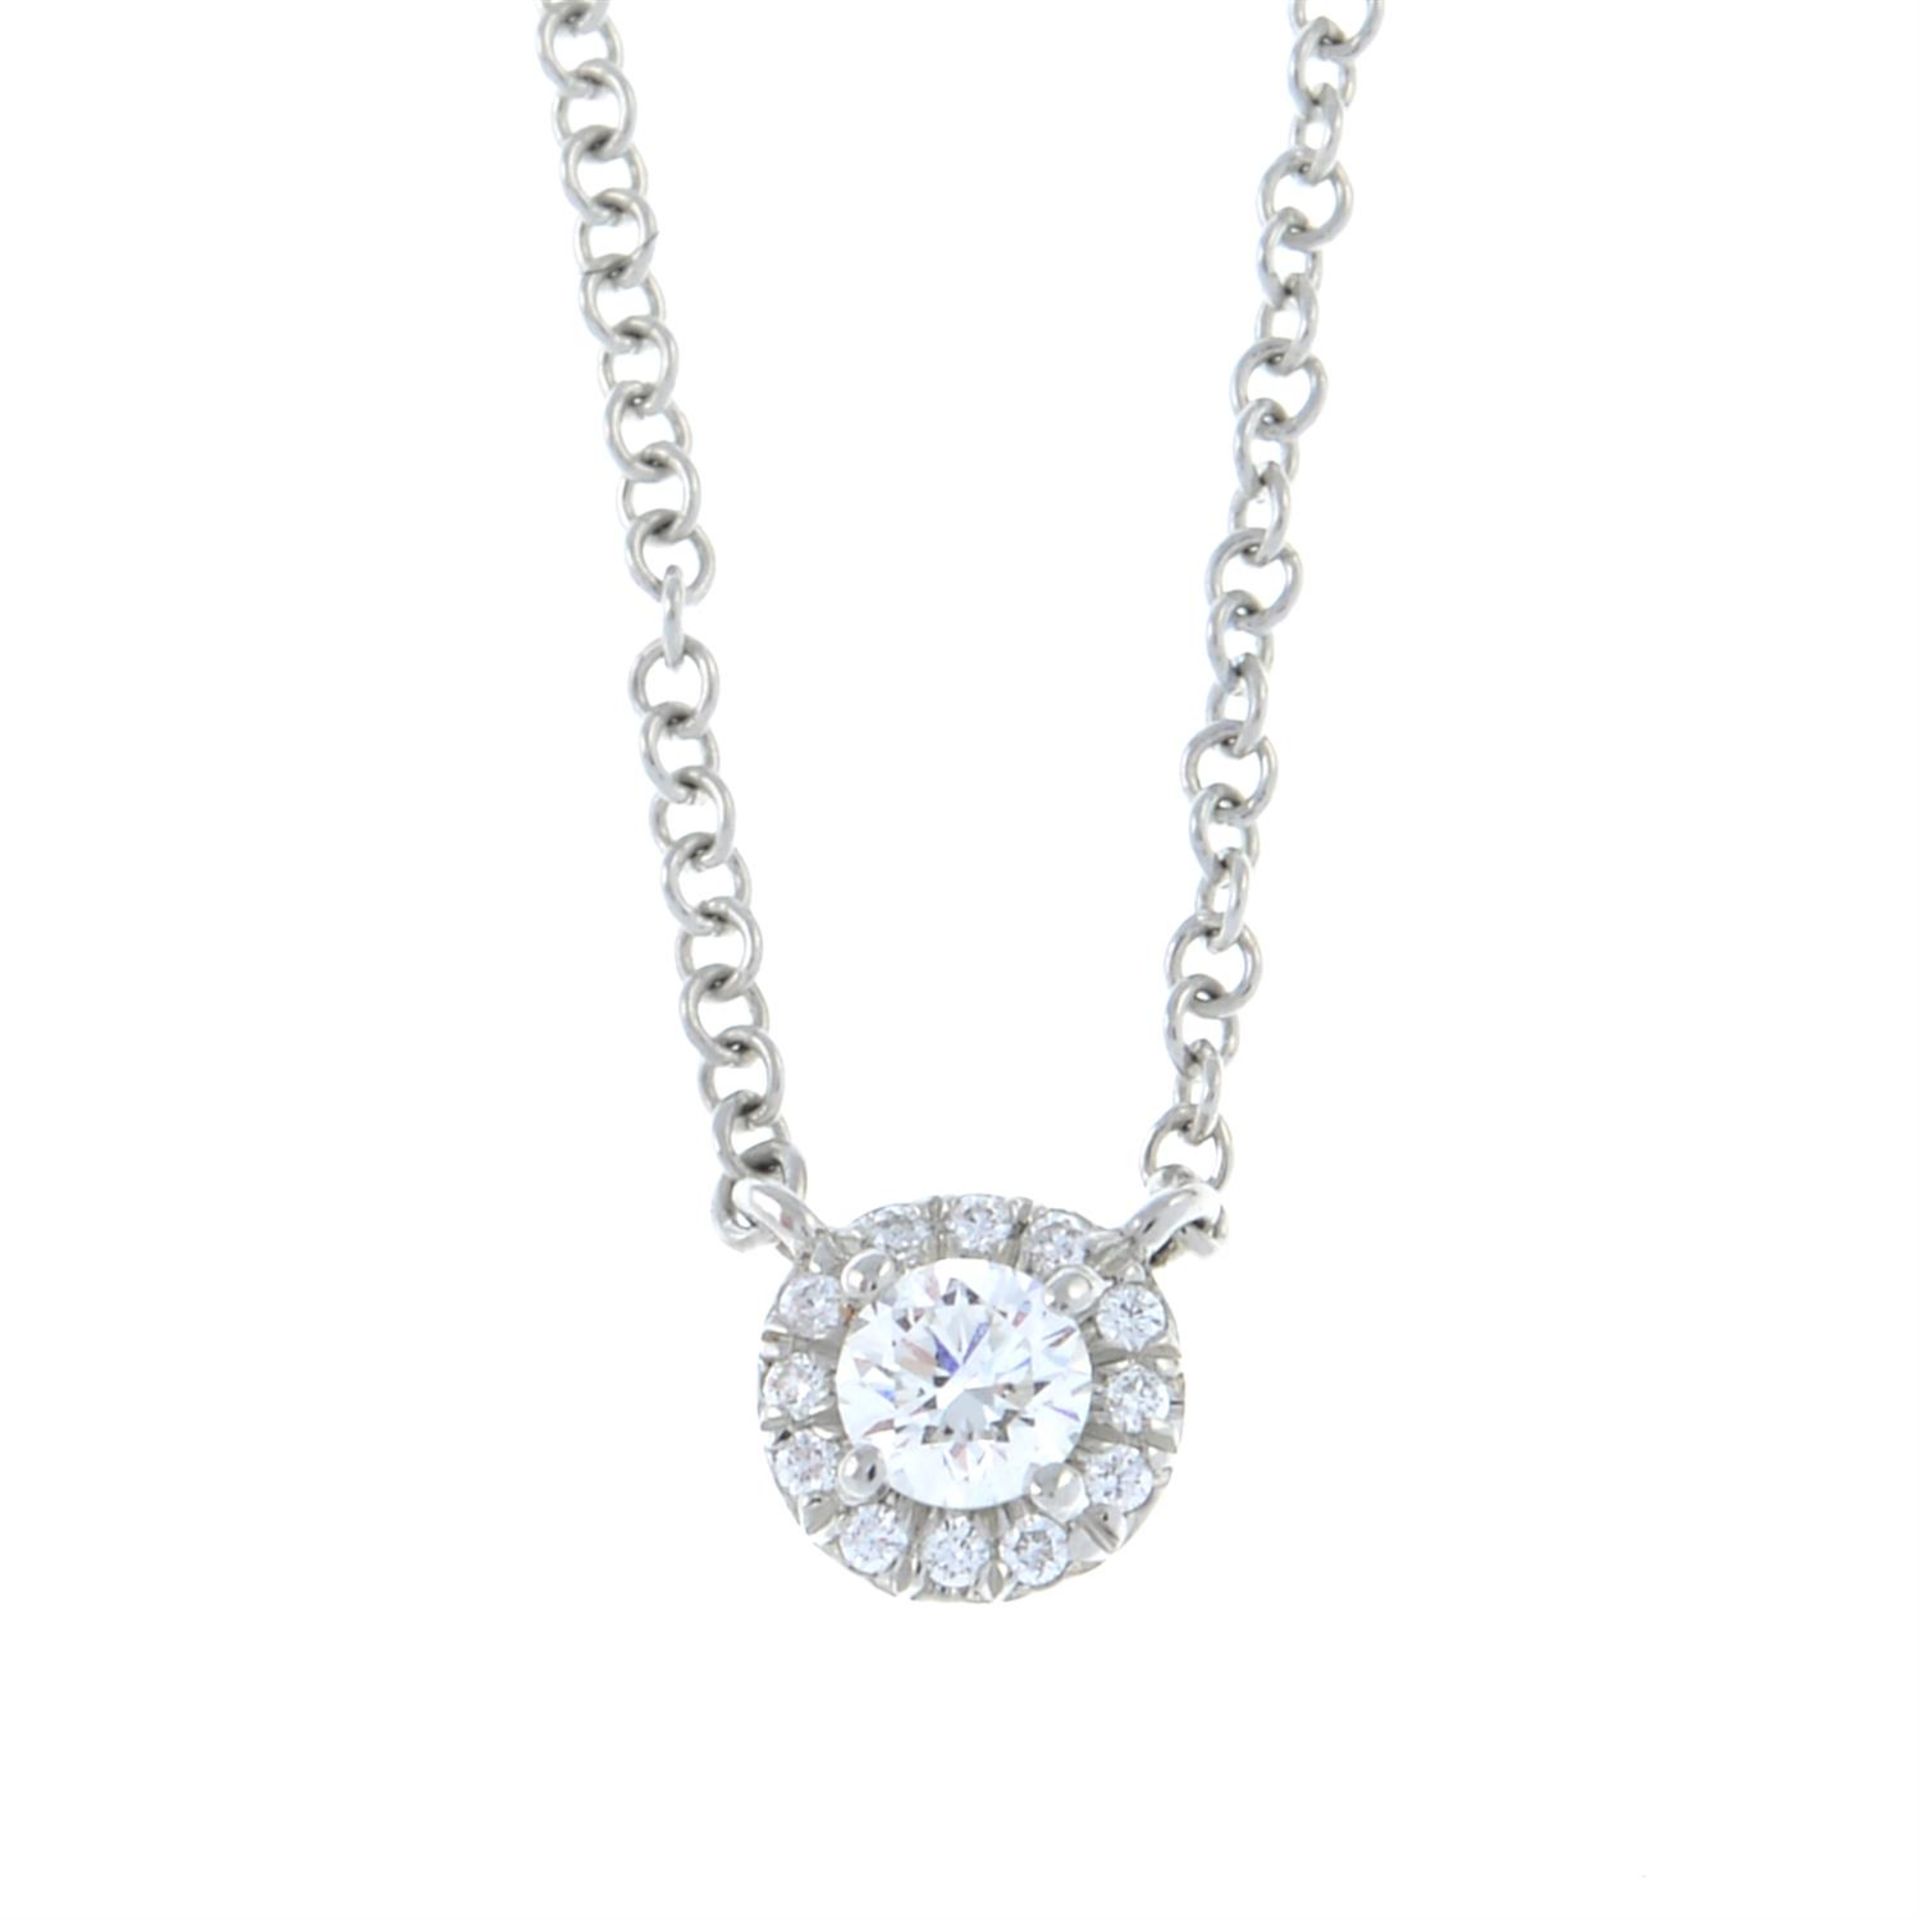 A brilliant-cut diamond cluster pendant, on an integral chain, by Tiffany & Co.